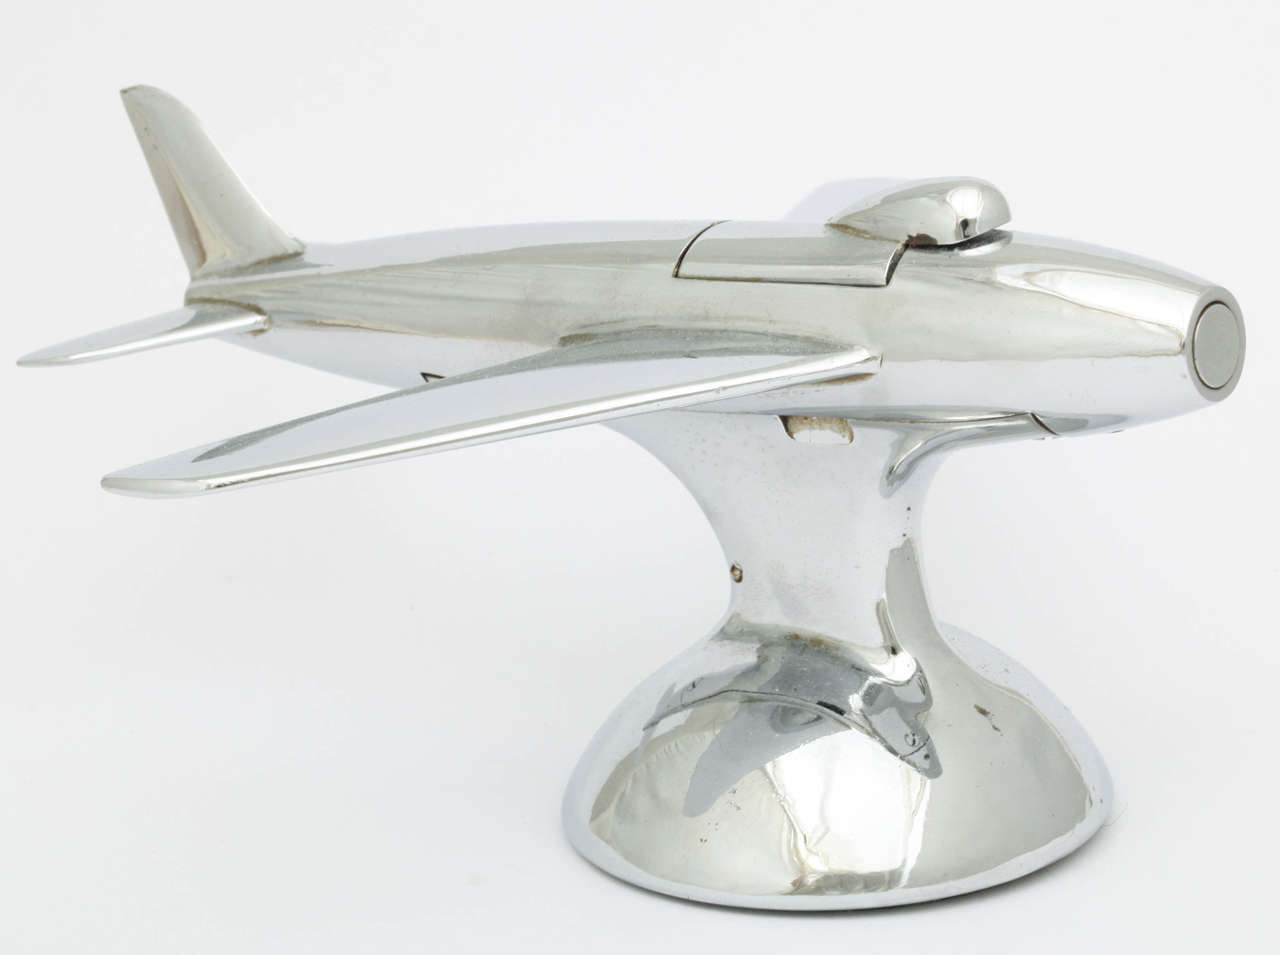 A Dunhill 'Jet Plane' Lighter that is modeled after the famous American F-86 Sabre transonic jet fighter aircraft. This aircraftset its first official world speed record of 570mph (920km/h) in September 1948. This table lighter first appeared in the